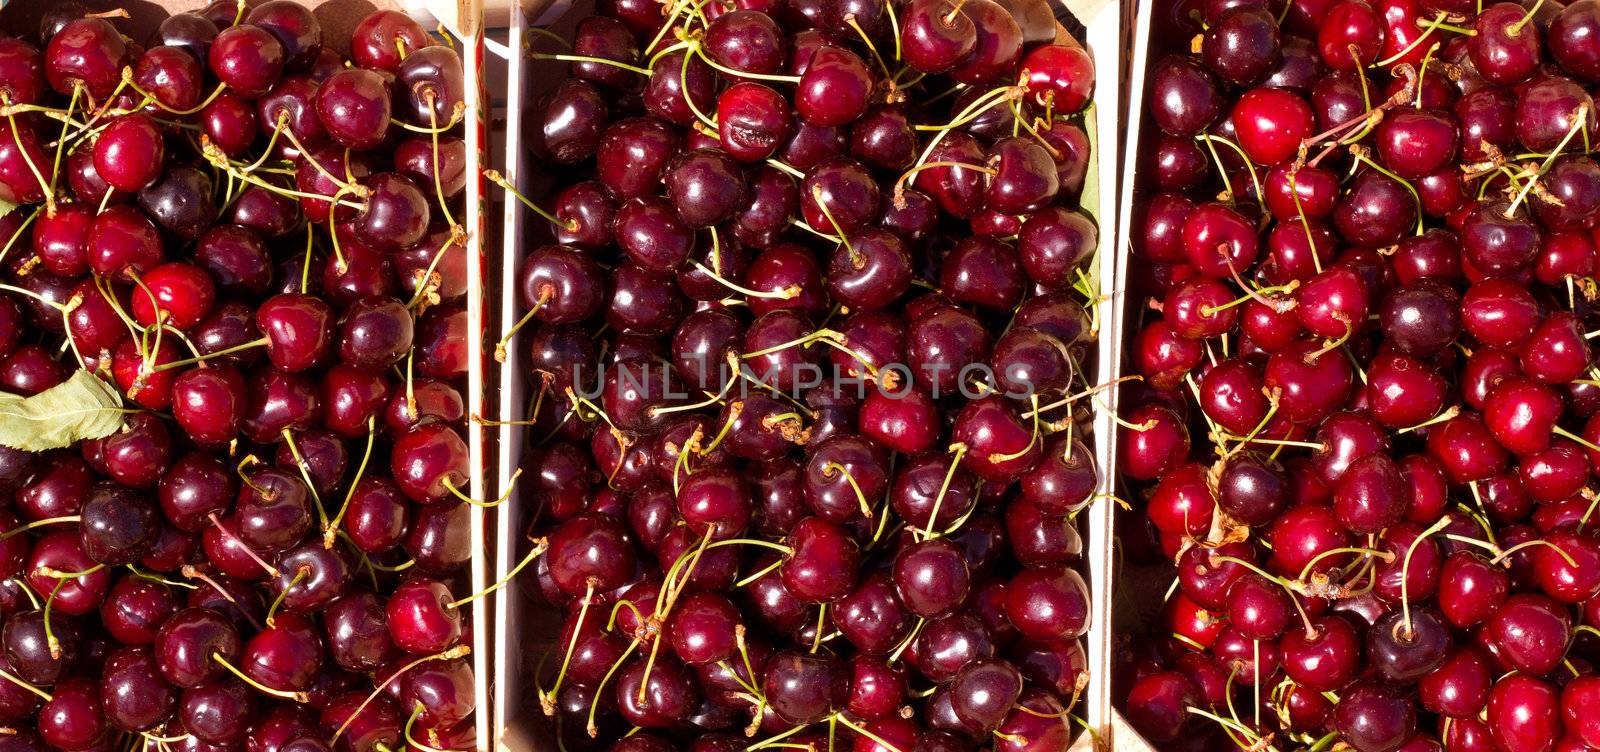 Cherry red fruits in wooden baskets at the market